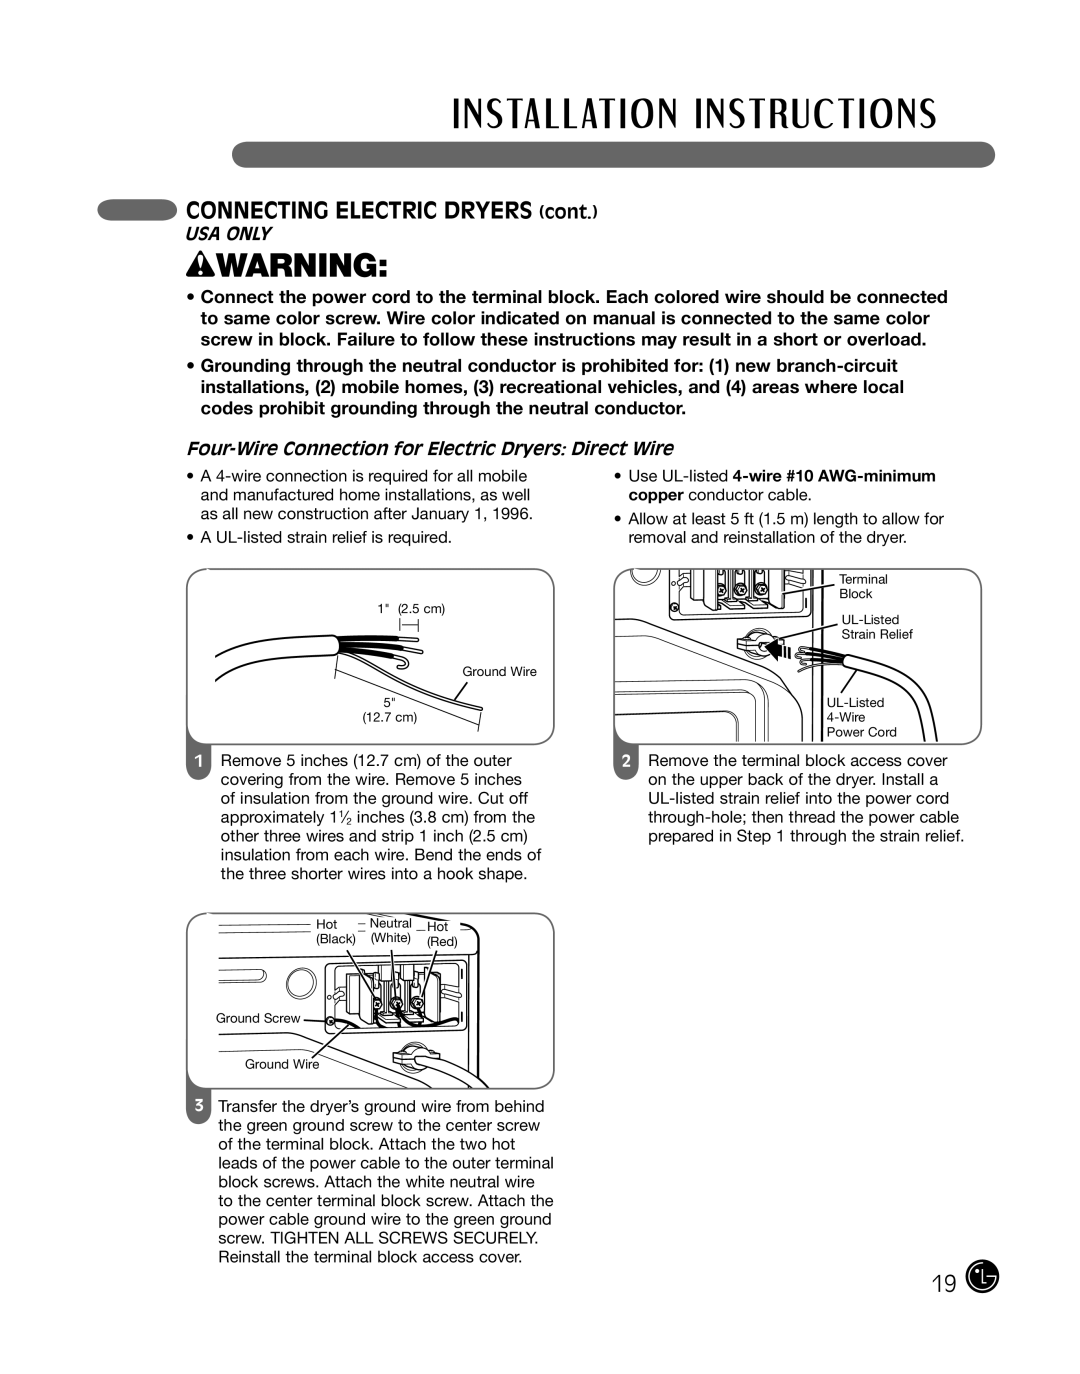 LG Electronics D2102W Four-Wire Connection for Electric Dryers Direct Wire, wWARNING, CONNECTING ELECTRIC DRYERS cont 